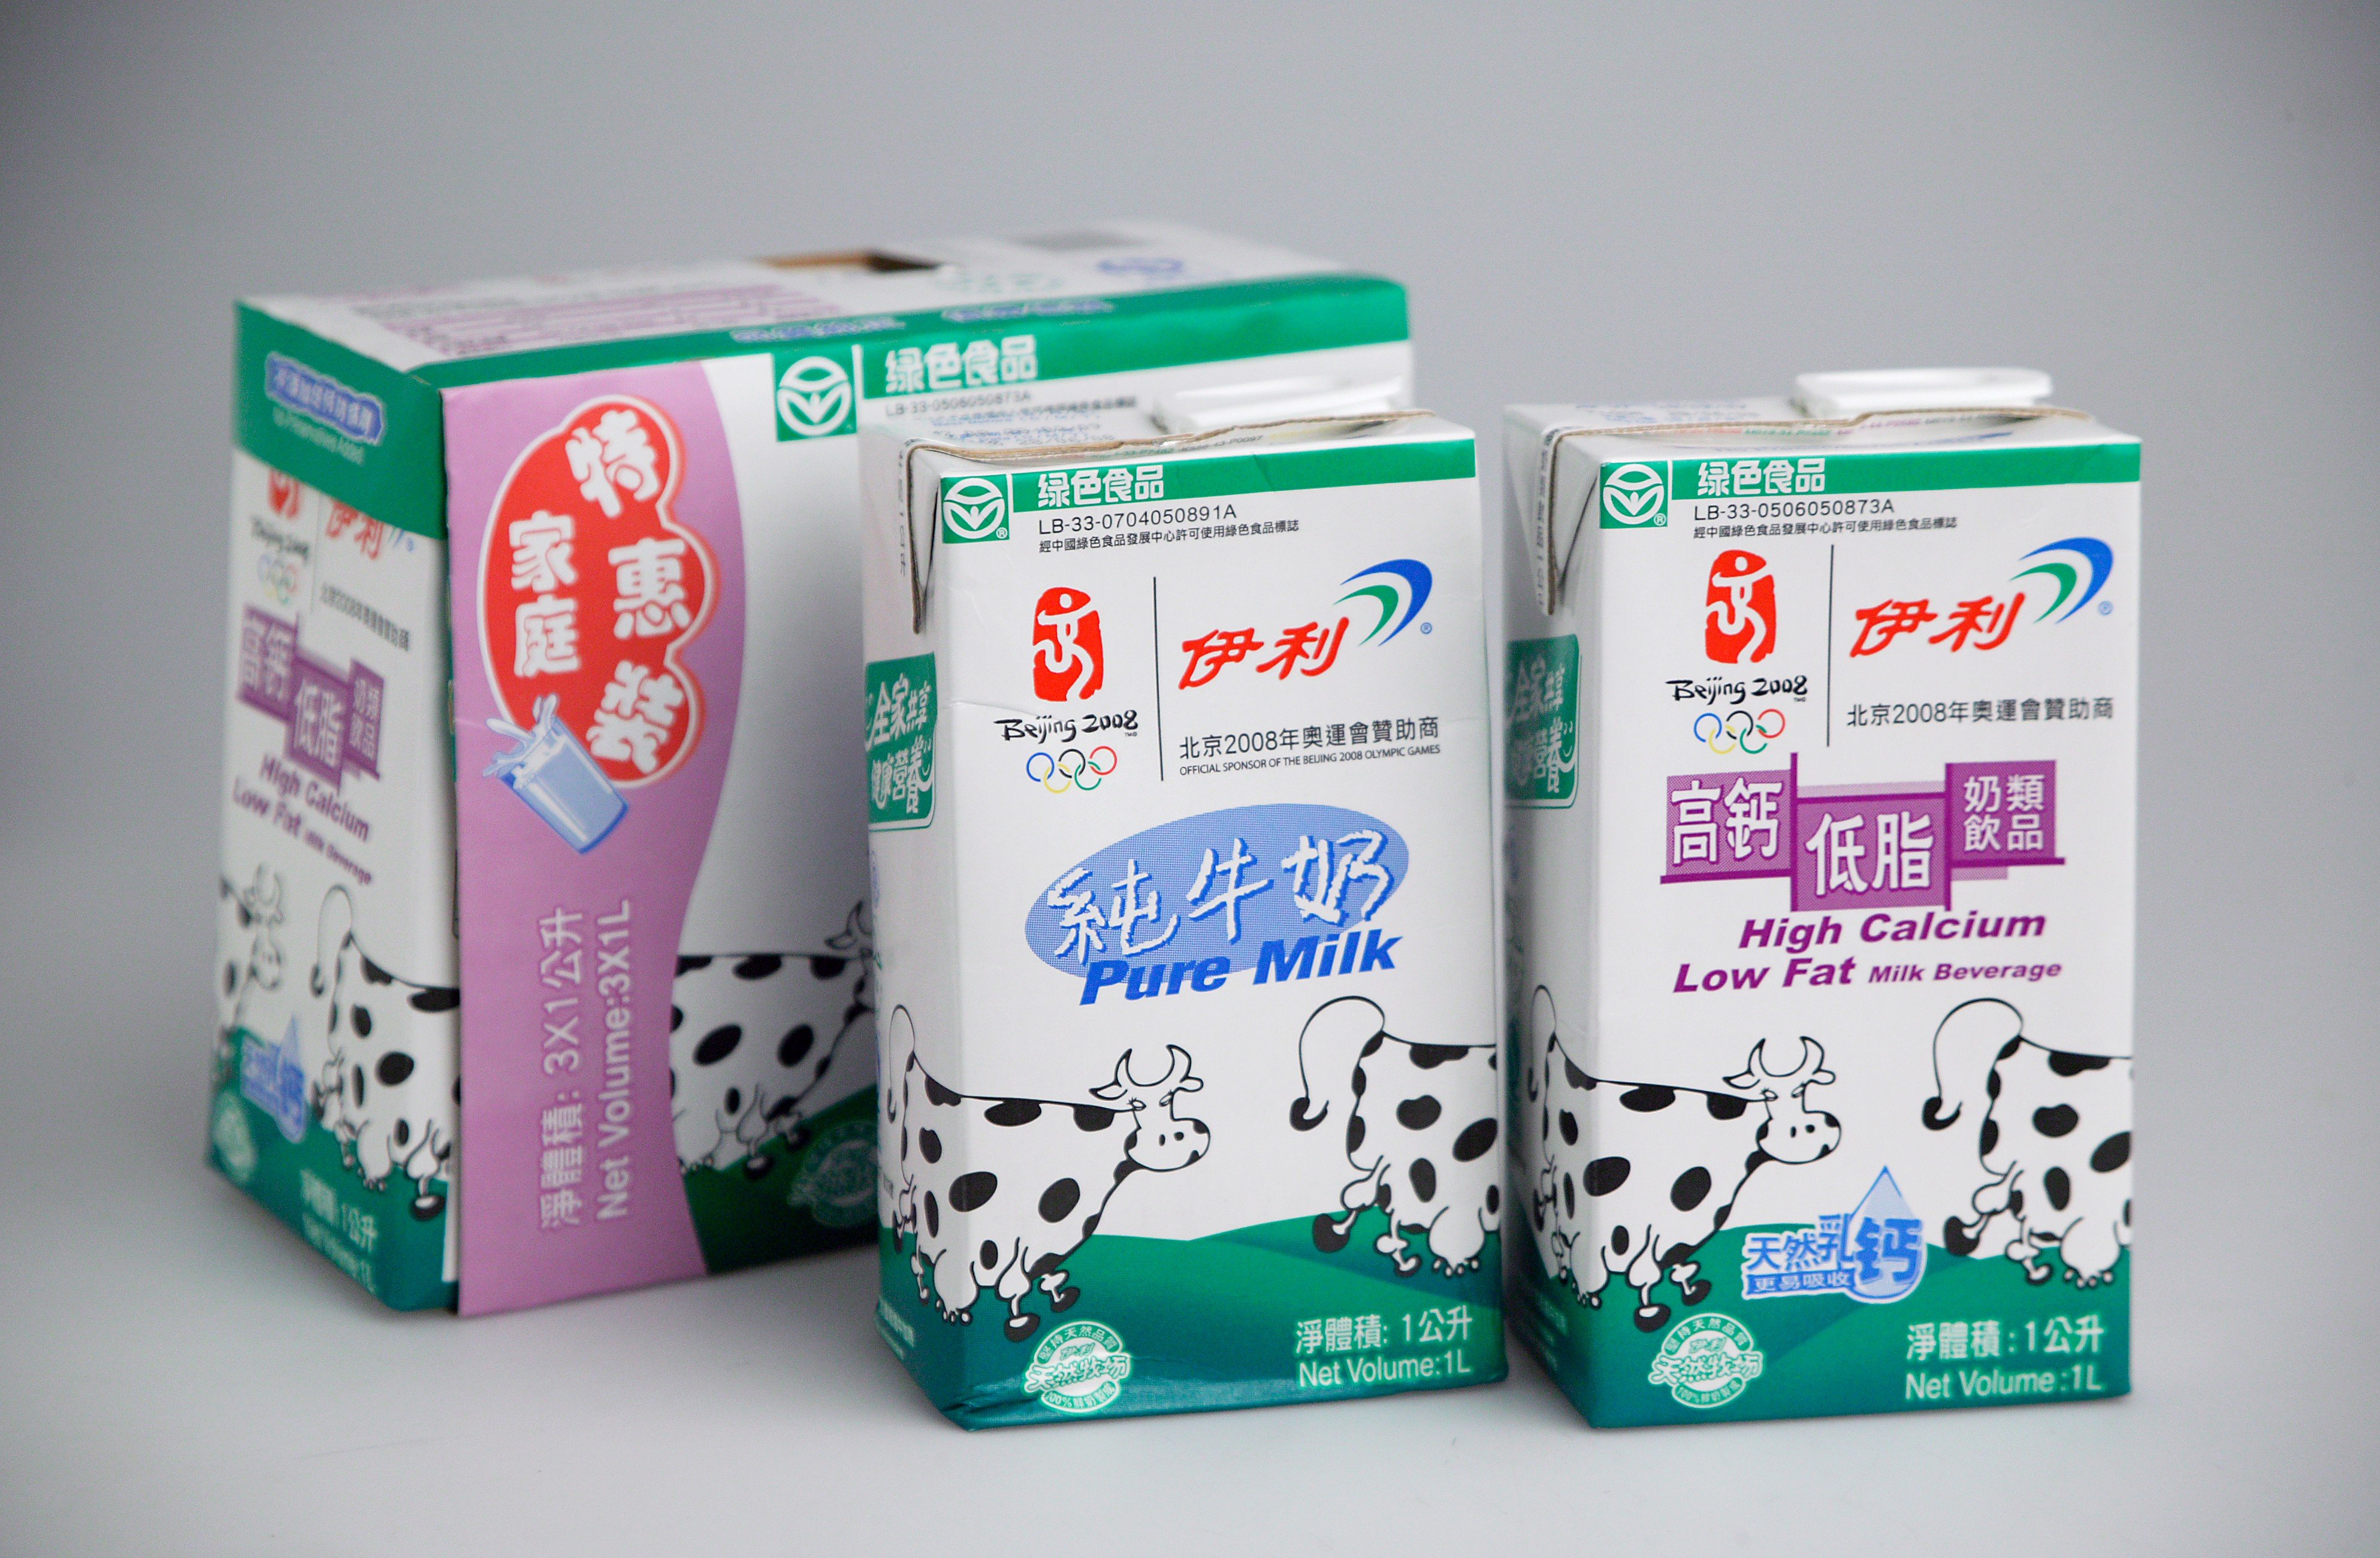 State-owned Chinese dairy company Yili Group claims its former president, Zheng Junhuai, embezzled public funds and defamed the company. Photo: SCMP